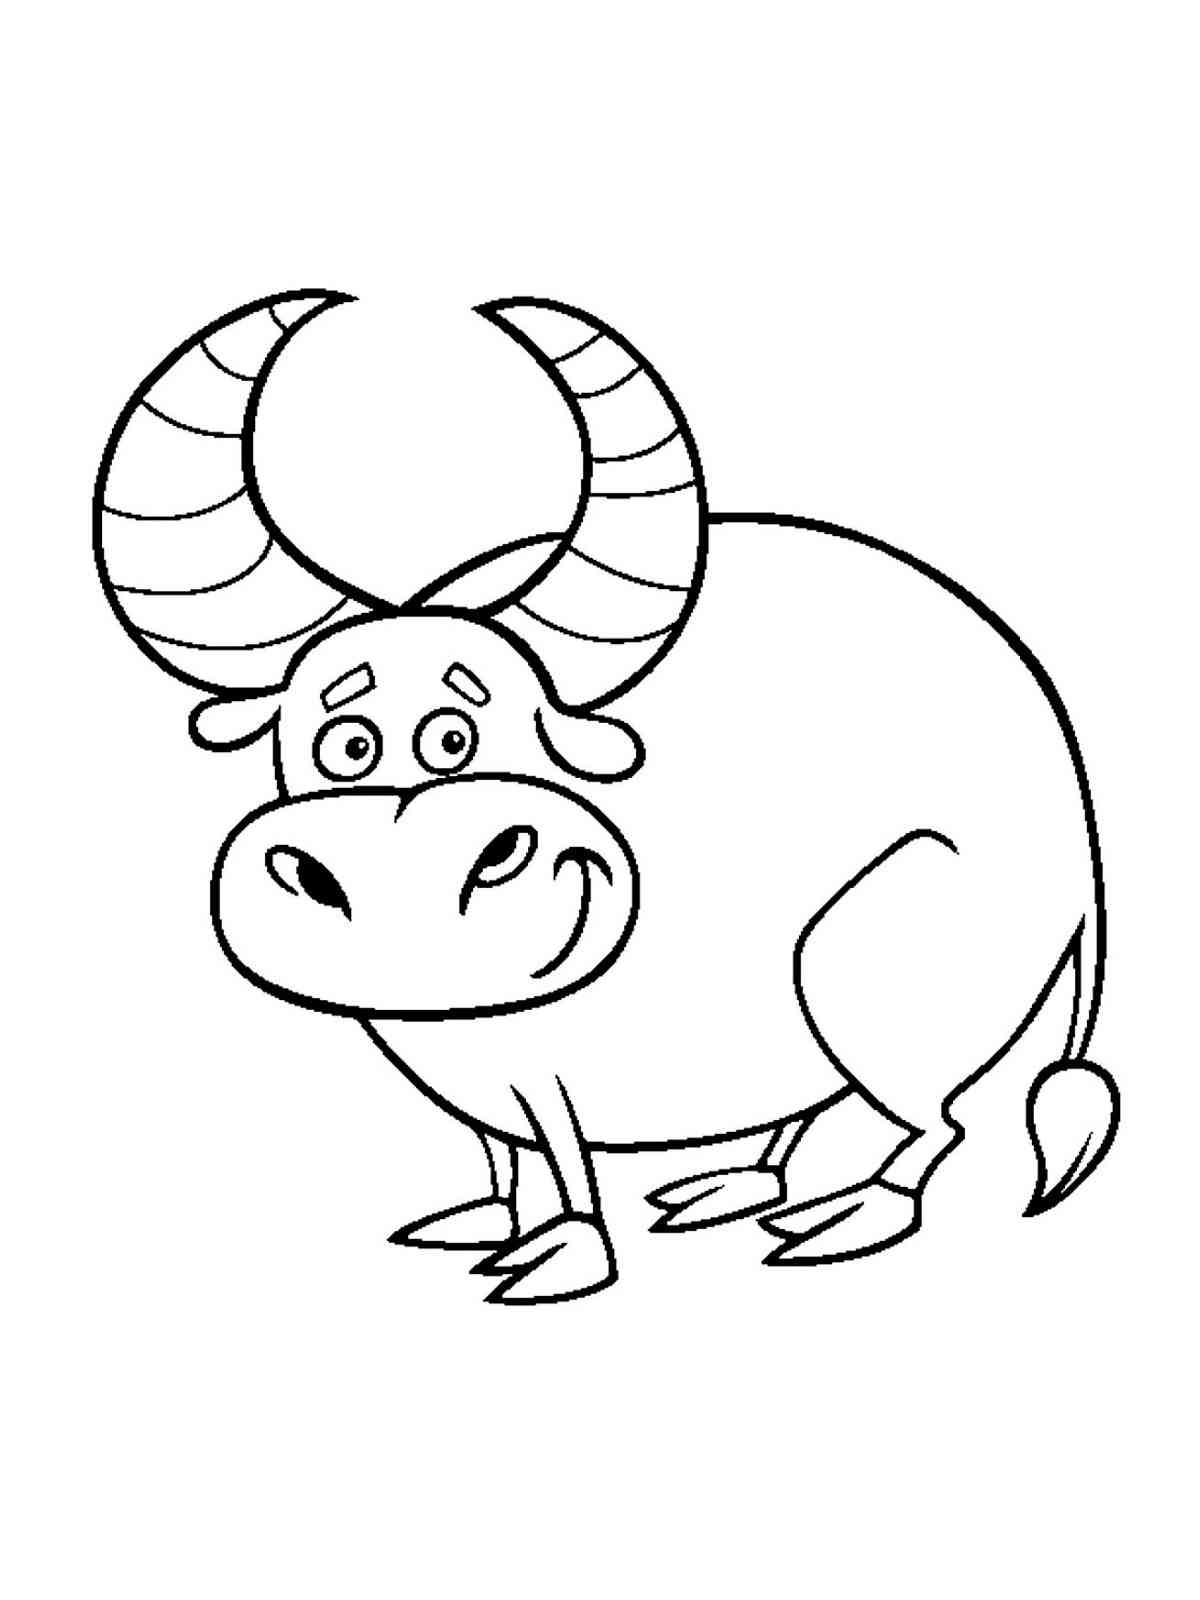 Funny Ox coloring page